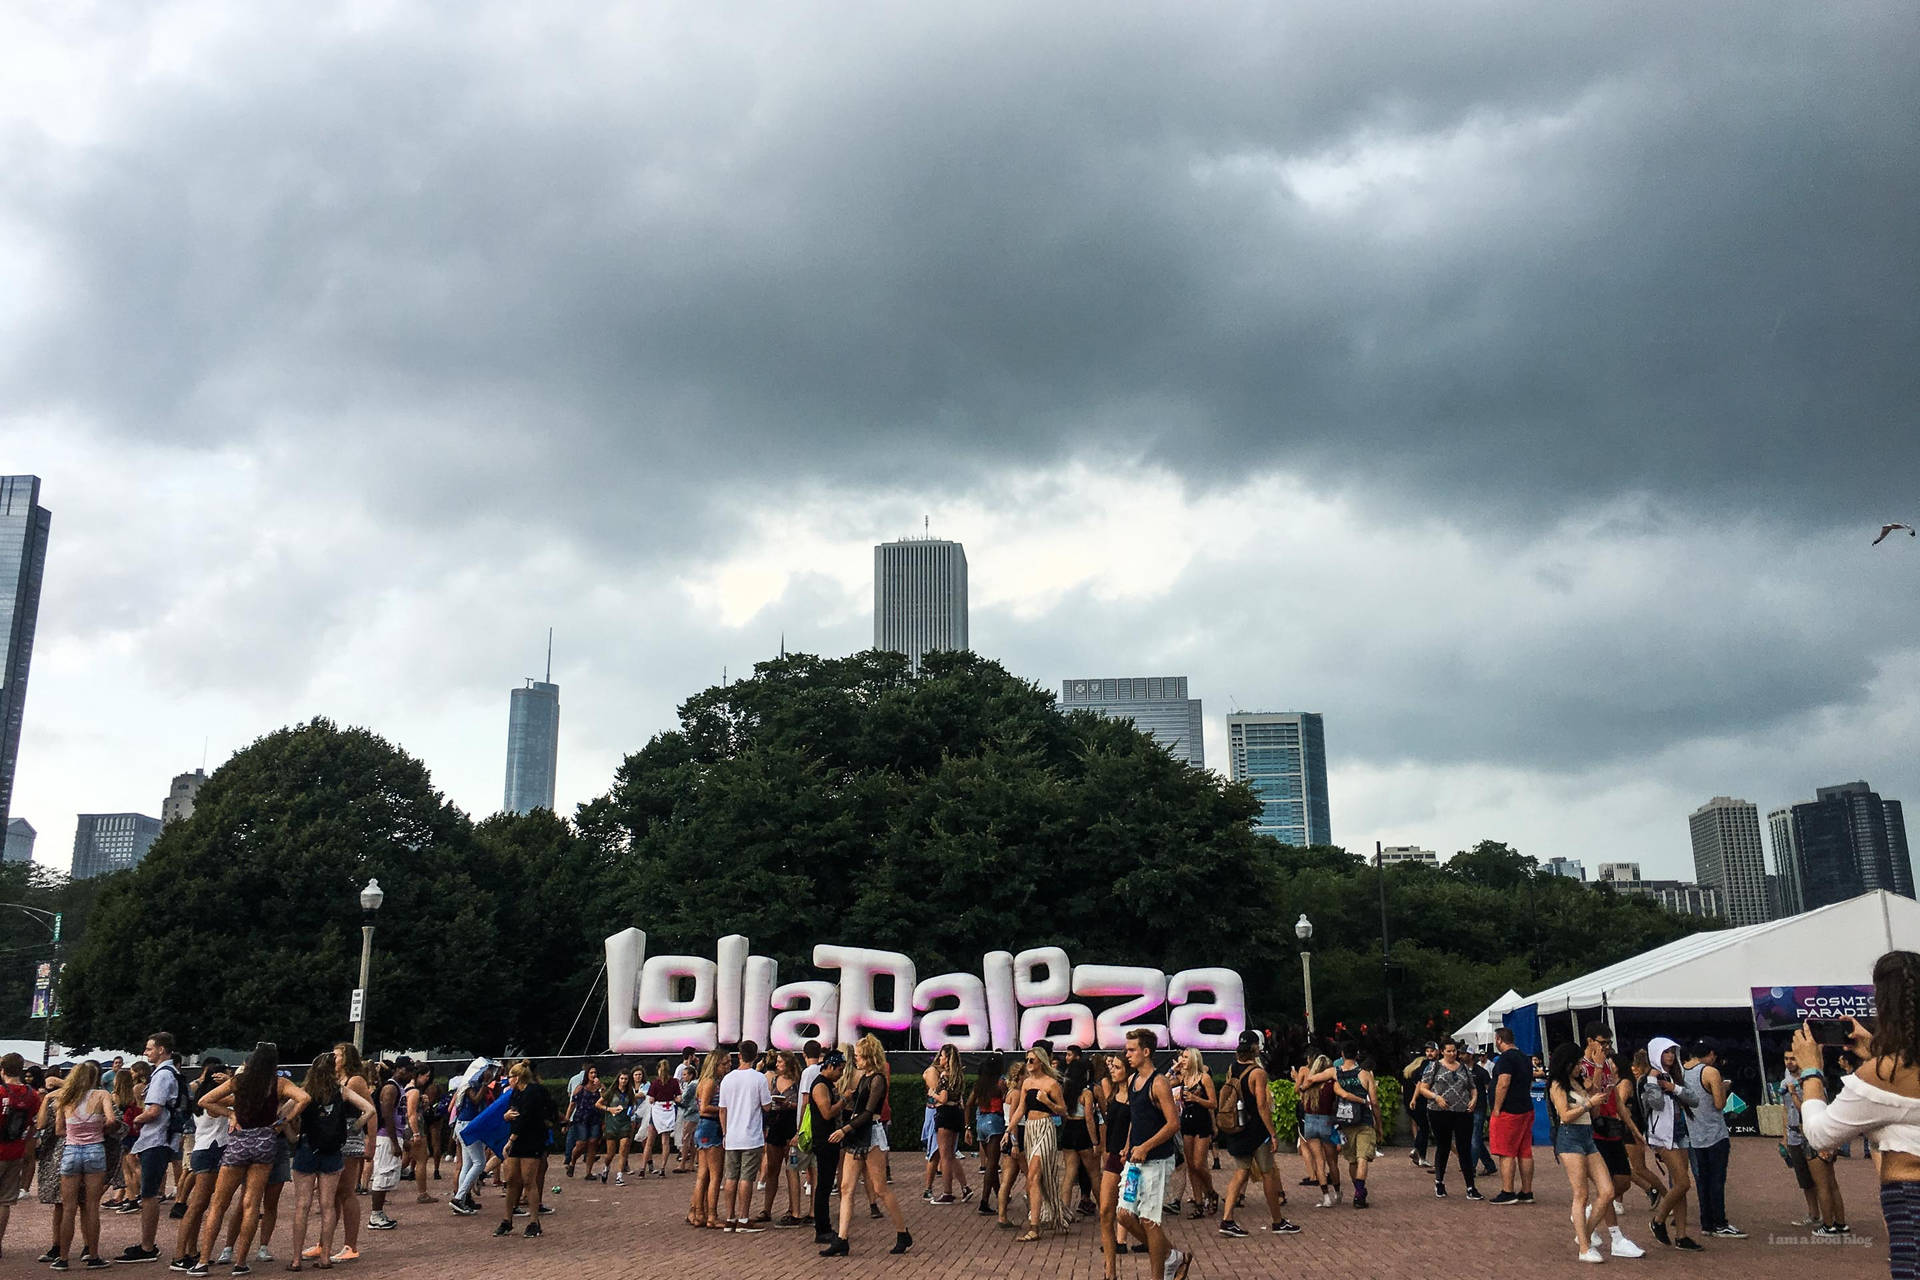 Looking Up Towards The Cloudy Chicago Skyline During The Annual Lollapalooza Music Festival